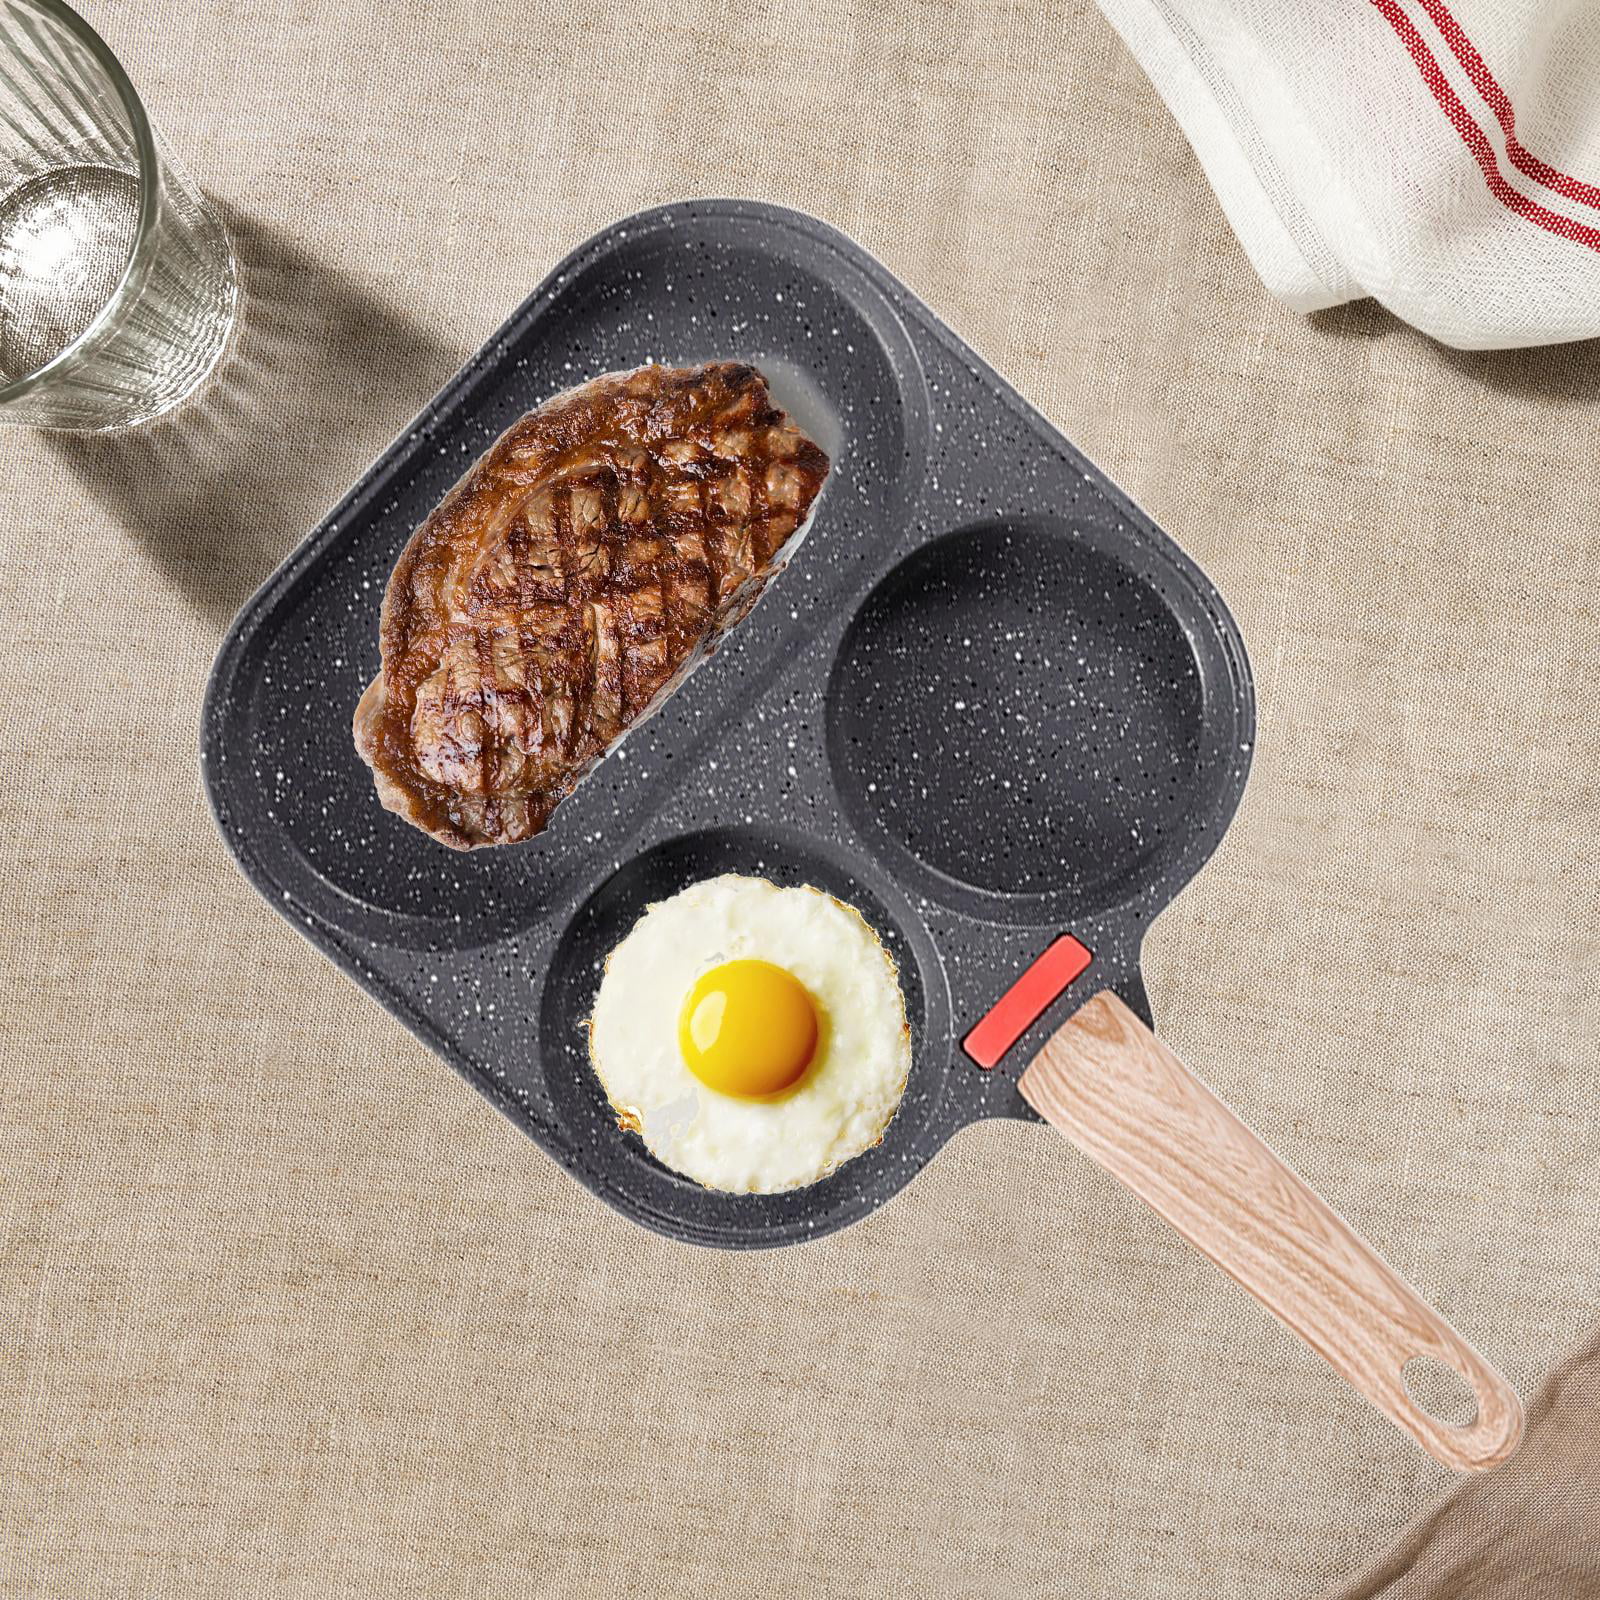 3 in 1 Electric Omelette Pan Breakfast Cooker Griddle Skillet Fittiings  Multiuse Non Stick Egg Frying pan burgers Vegetable Toast Steak Fish green  